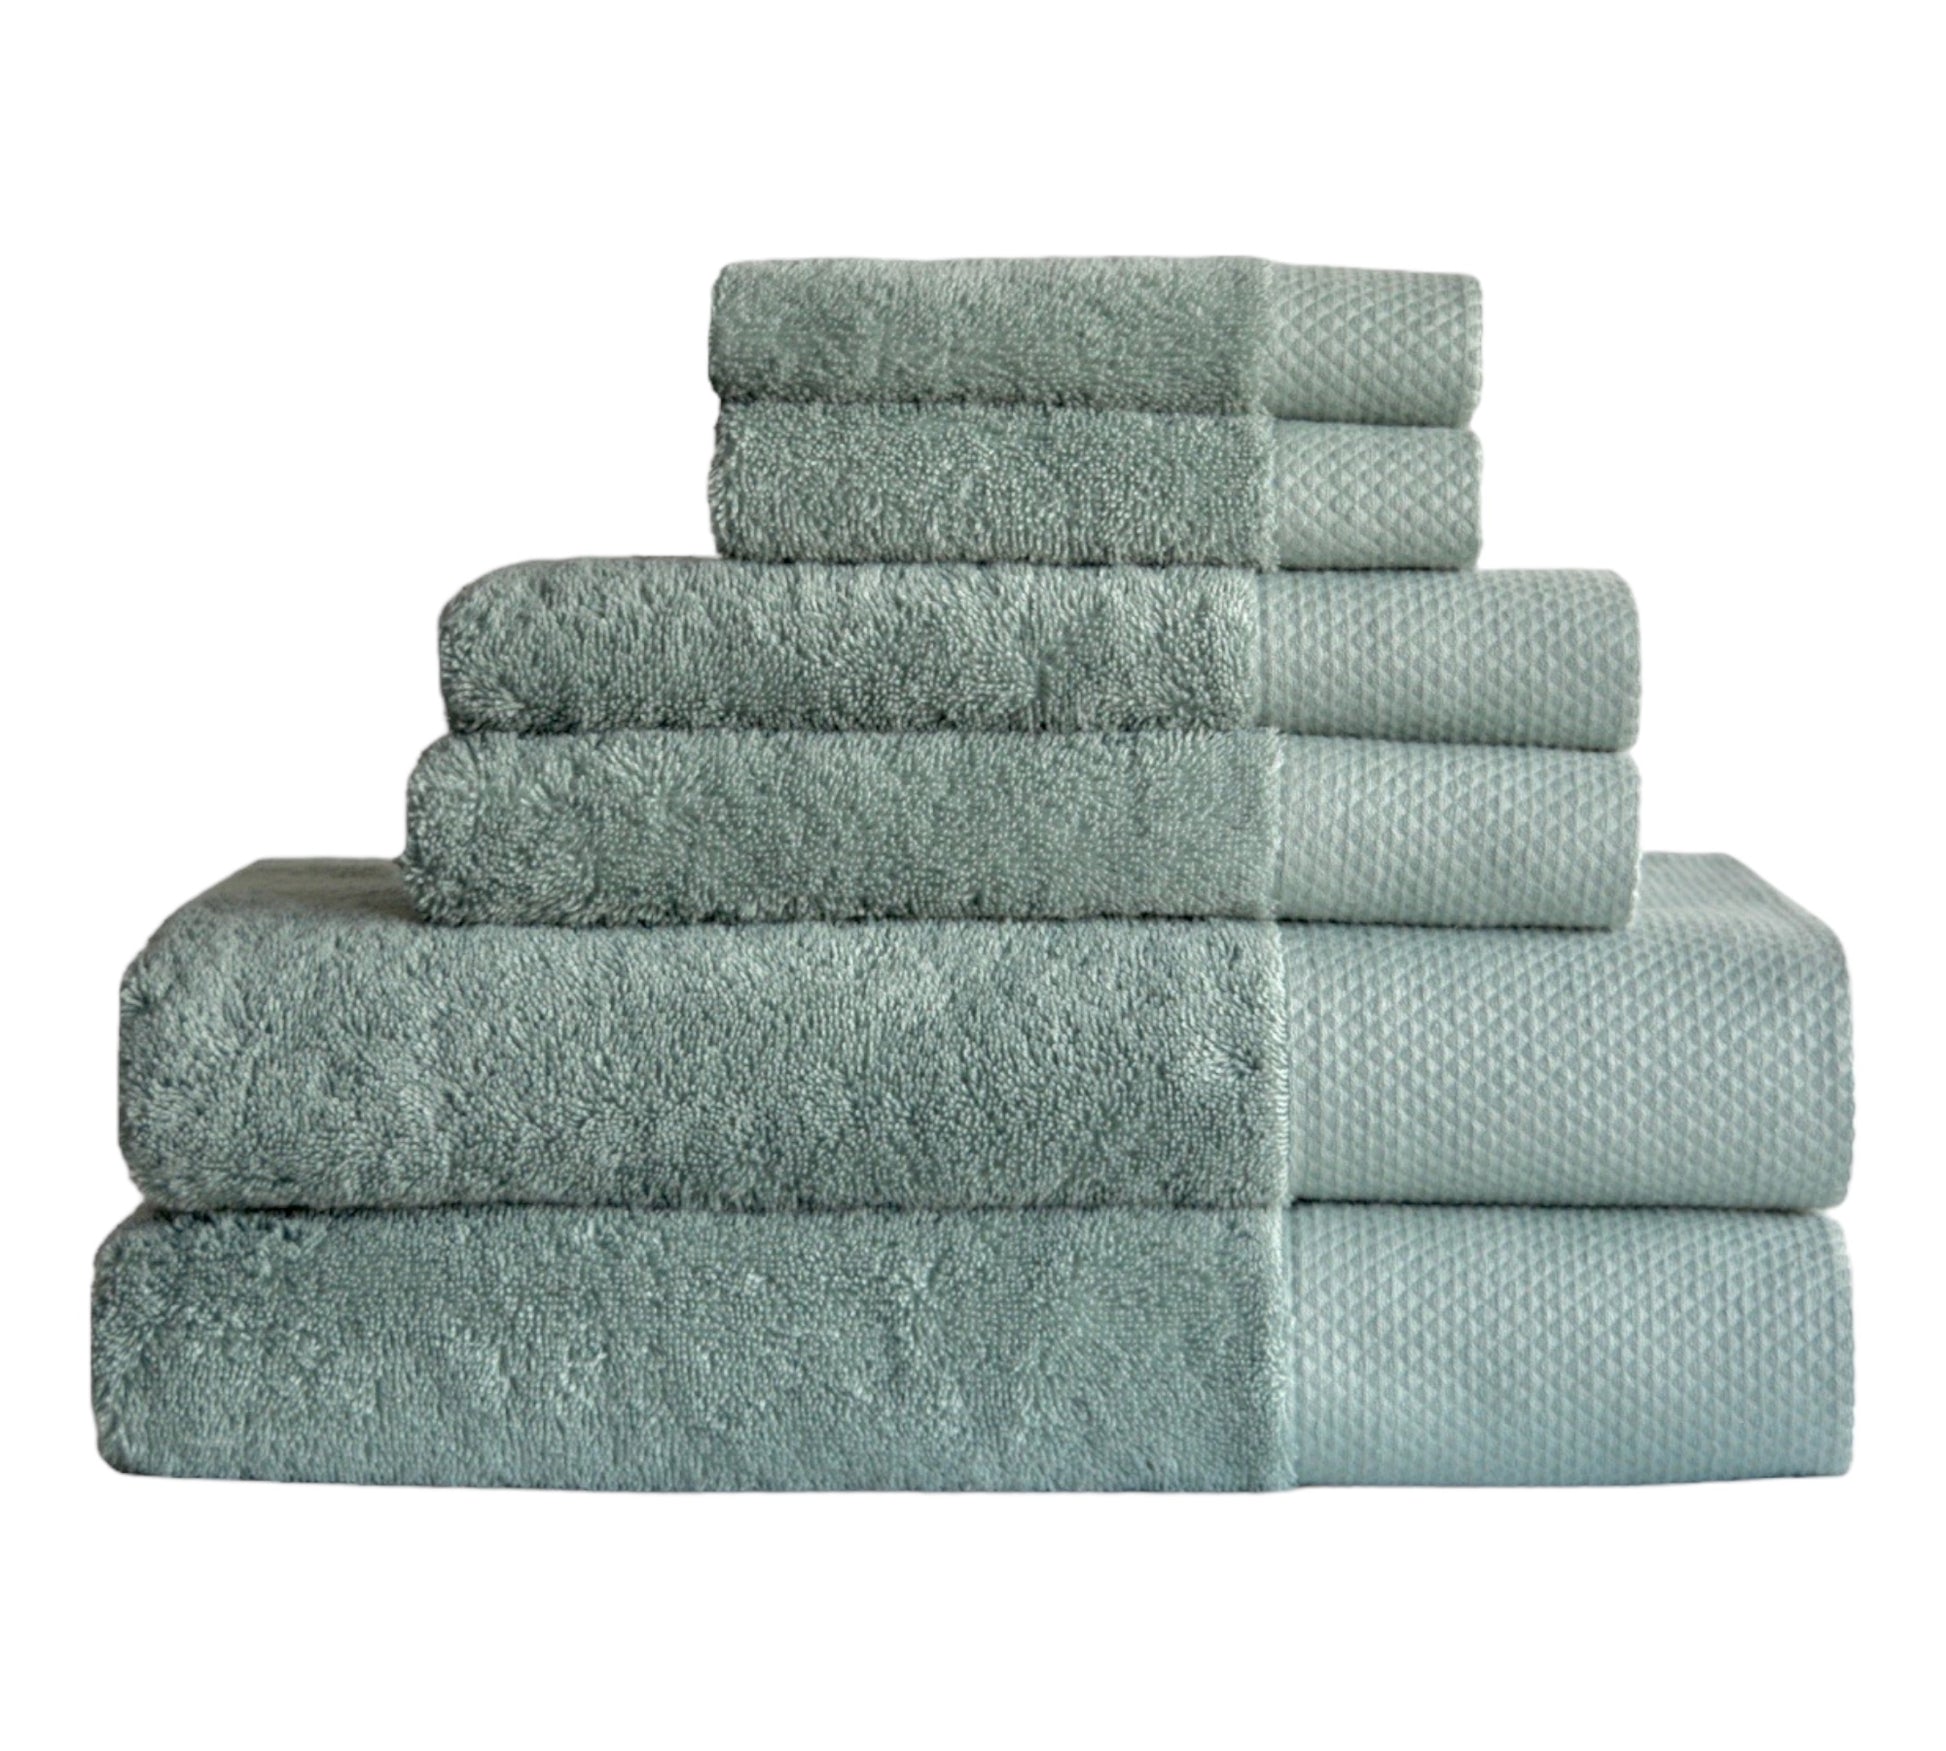 Cotton towel set in Willow Leaf (light Green) color